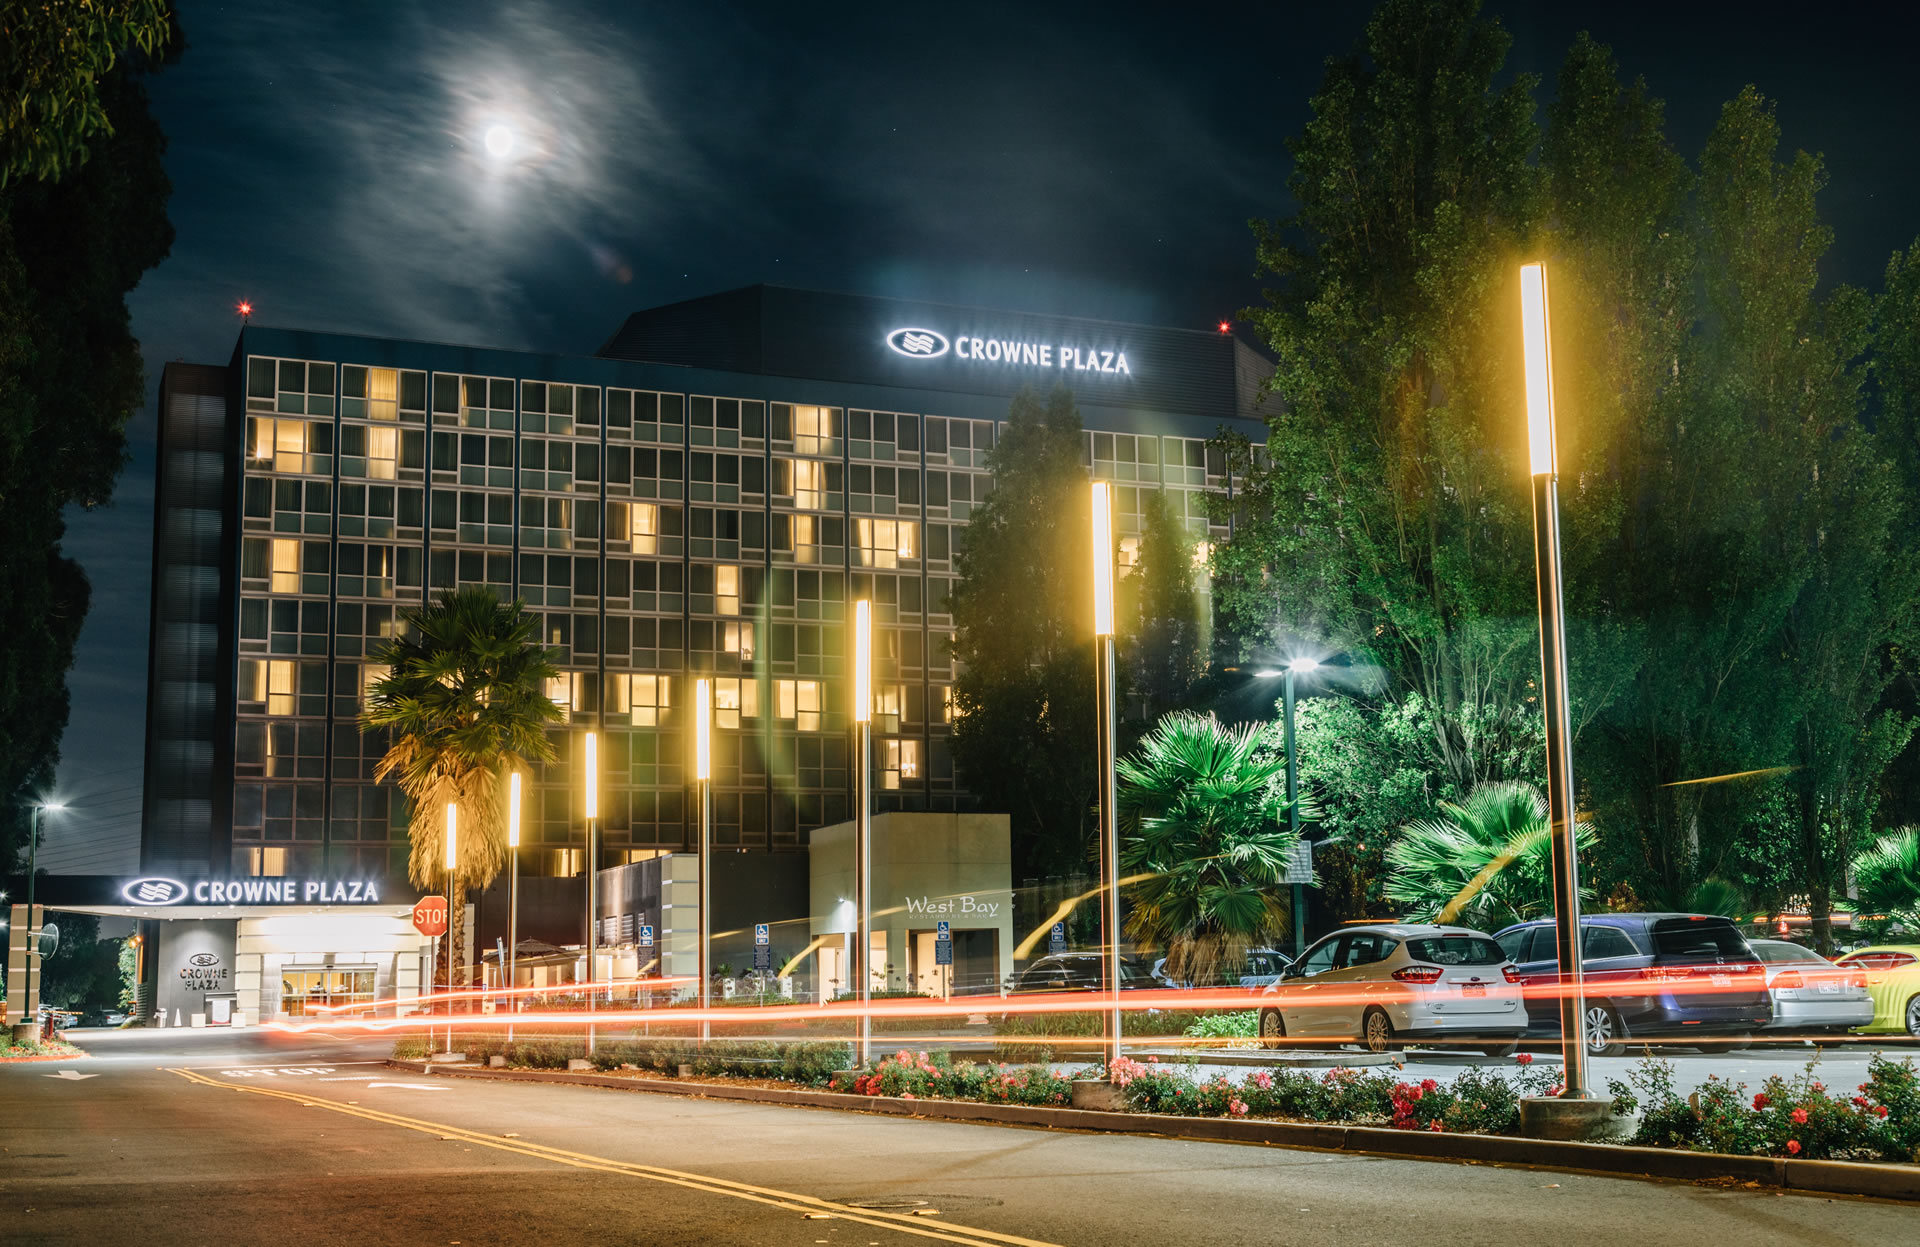 View of the Crowne Plaza San Francisco Airport hotel exterior at night.